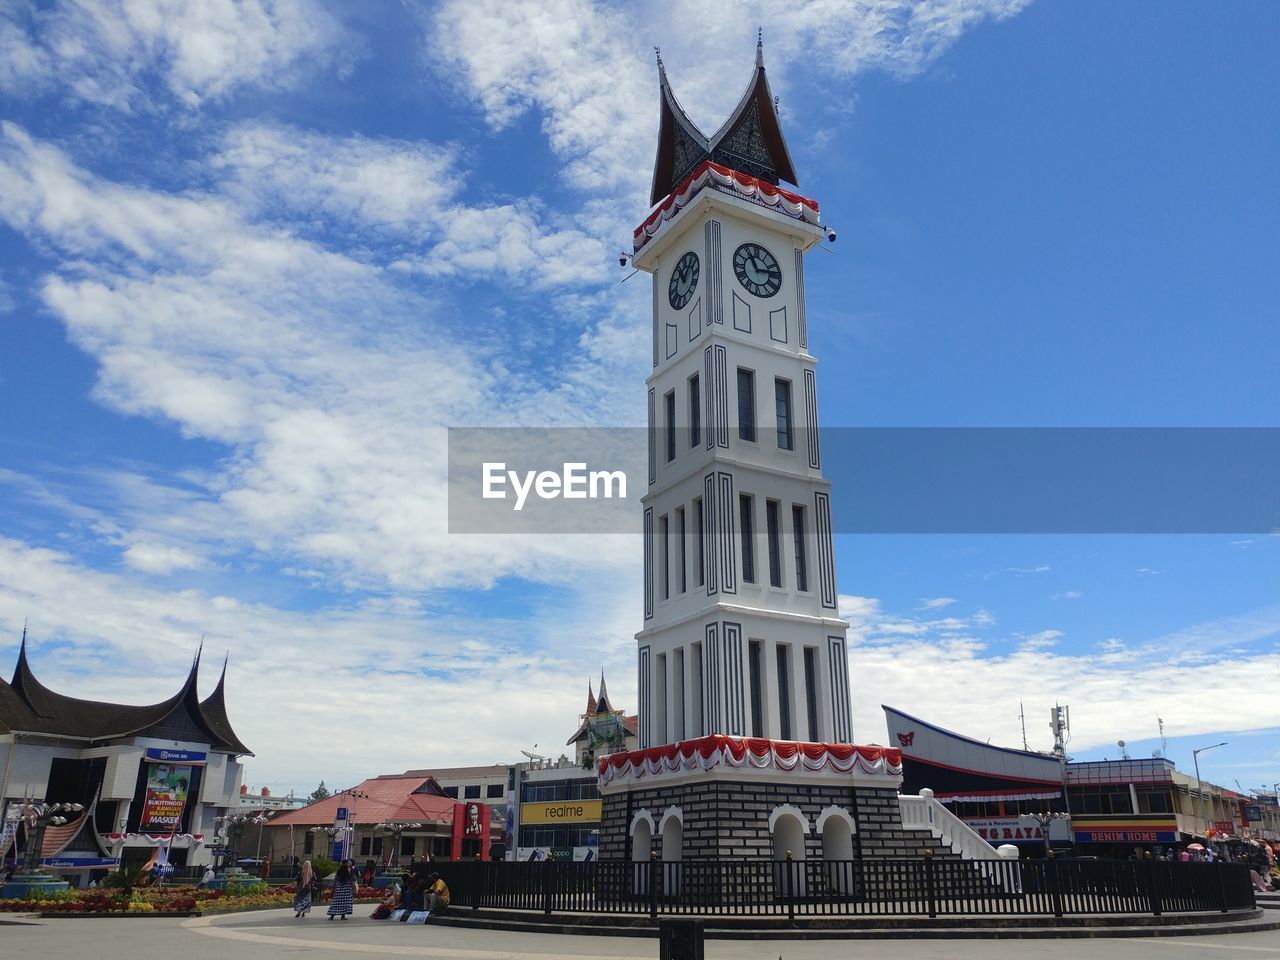 Jam gadang is one of the tourism spots in west sumatra.